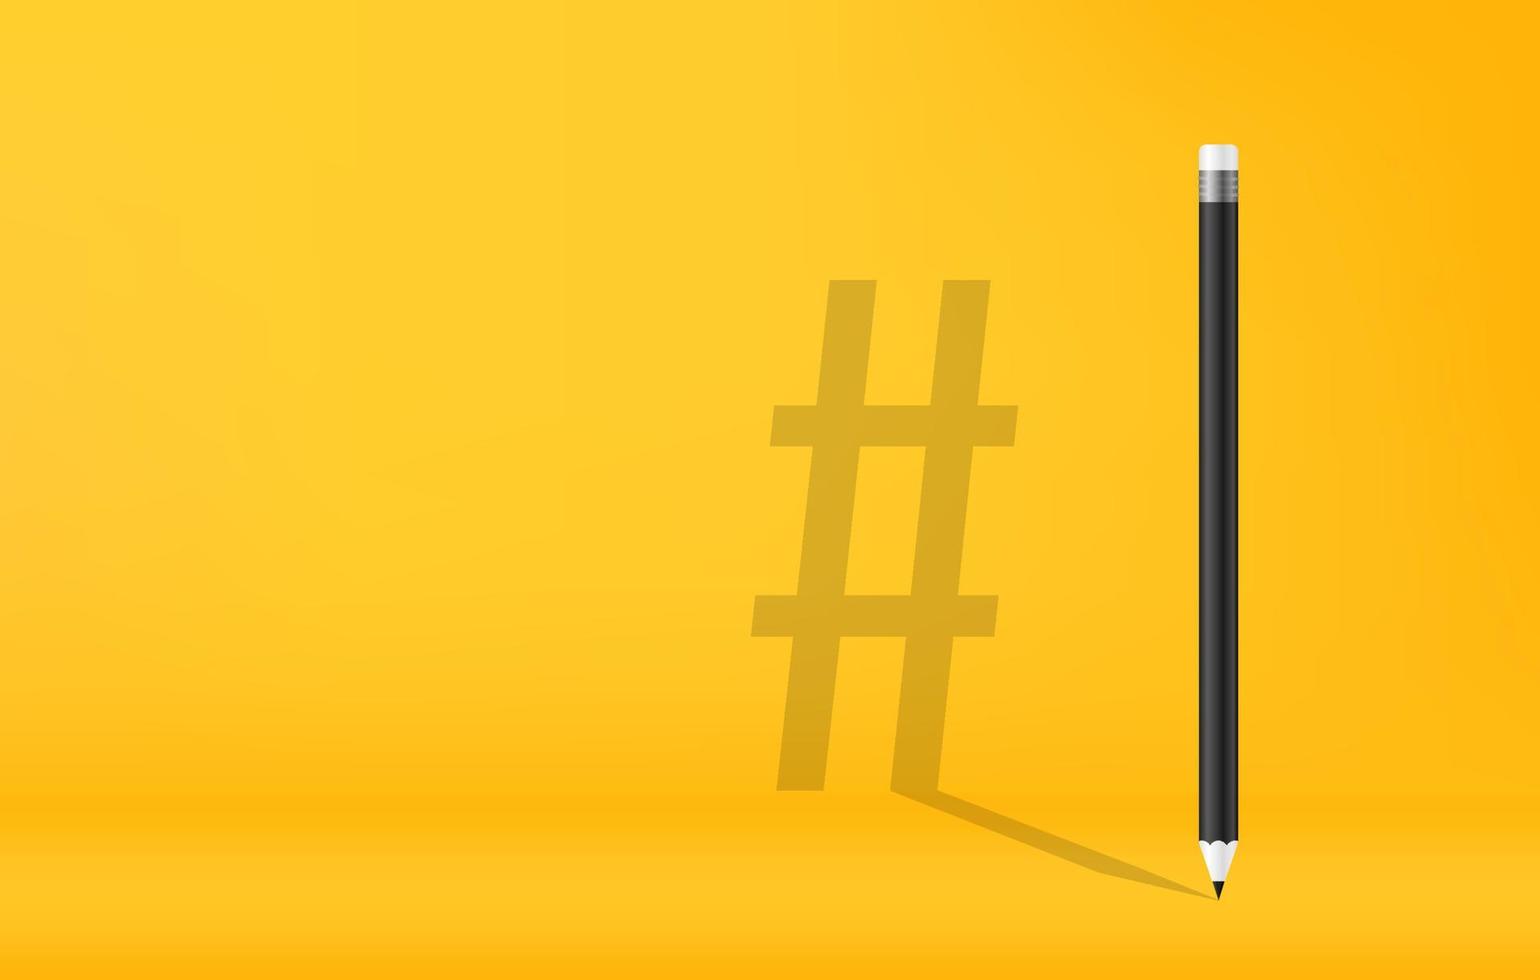 Pencil with hashtag symbol shadow on yellow background vector